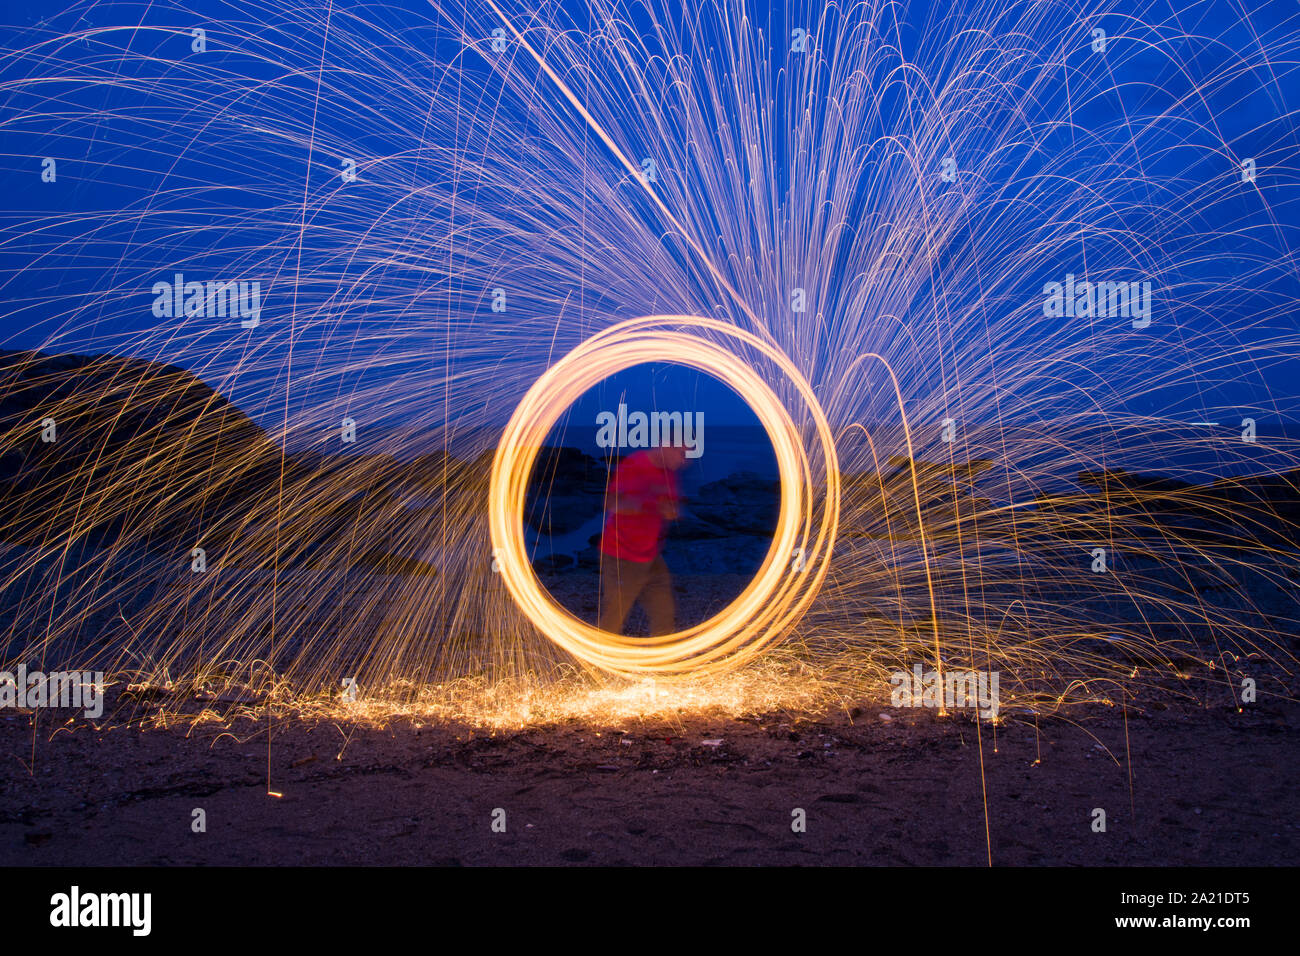 A man doing circular spinning light painting using steel wool at night on the beach. Stock Photo